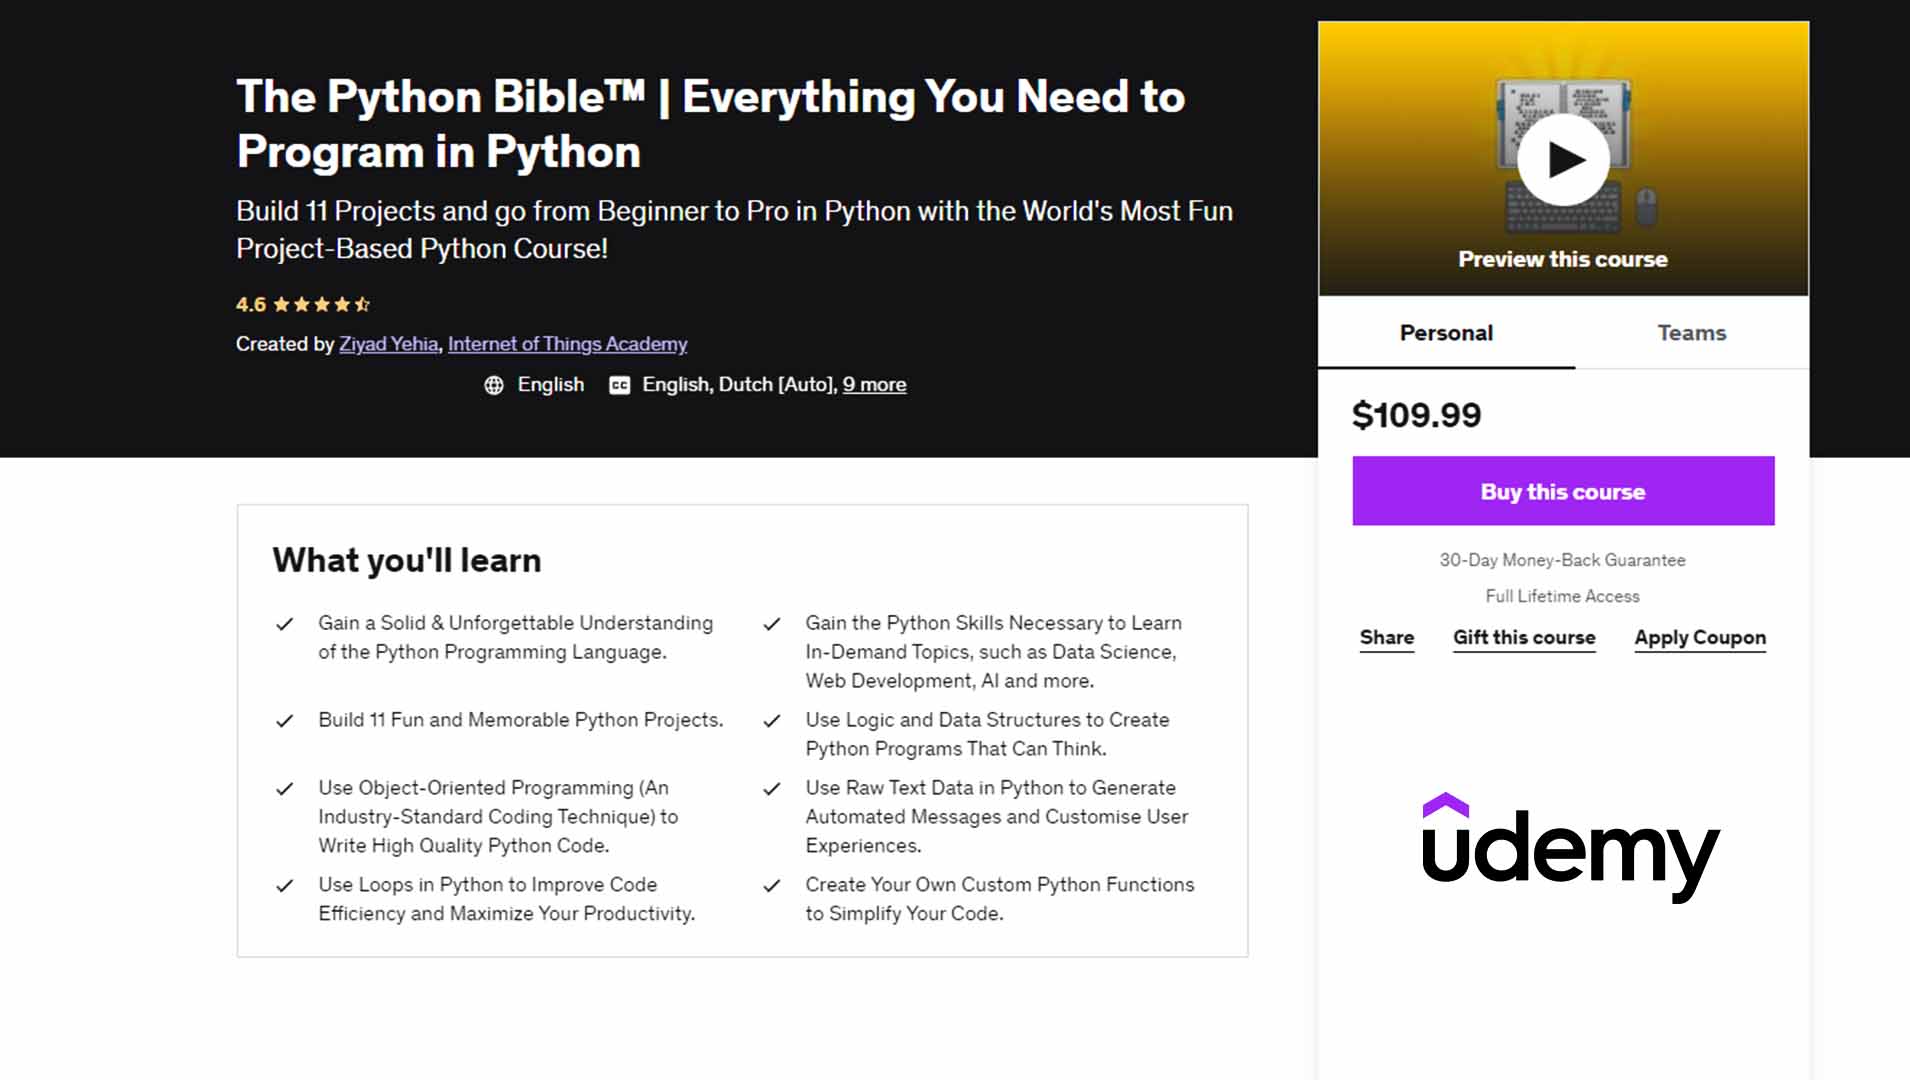 The Python Bible | Everything You Need to Program in Python